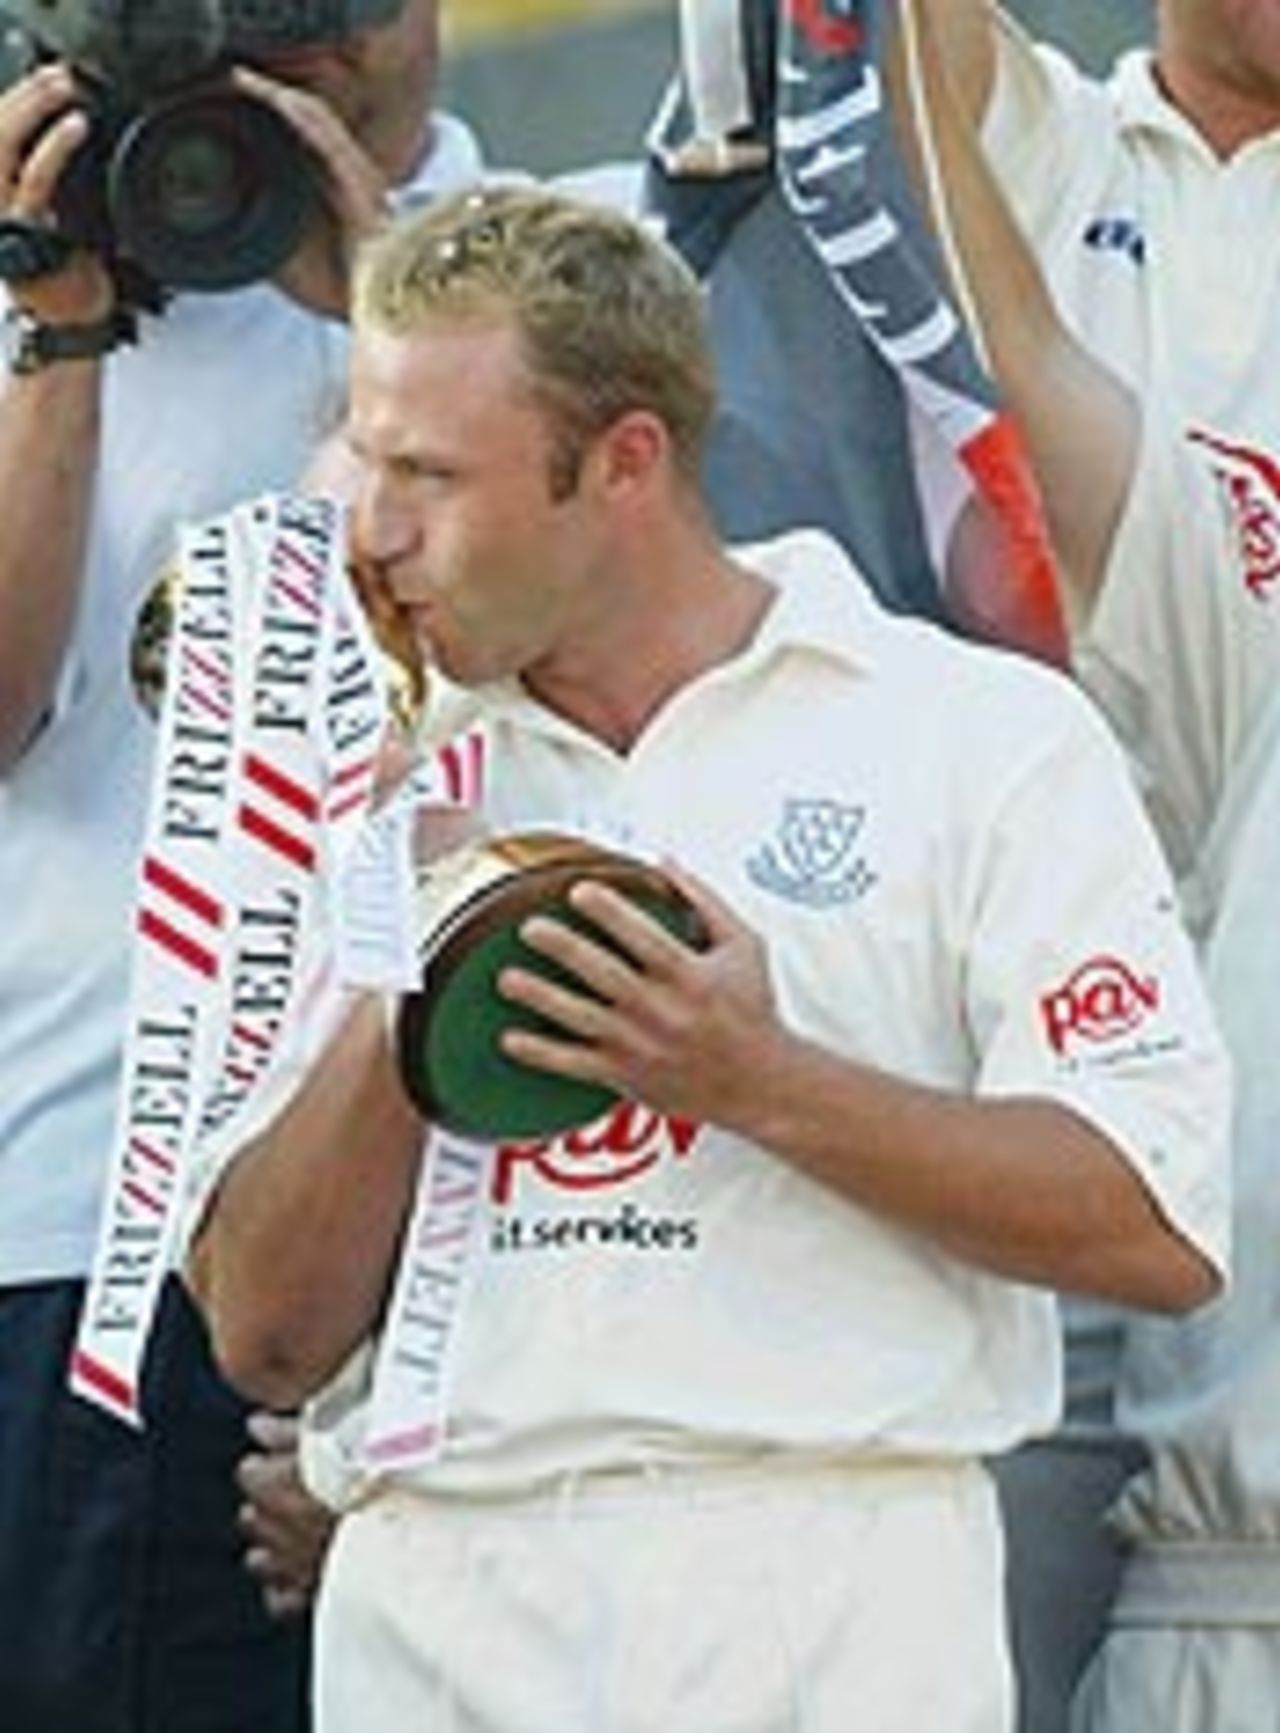 Chris Adams lifts the Championship trophy for Sussex, 19 September 2003